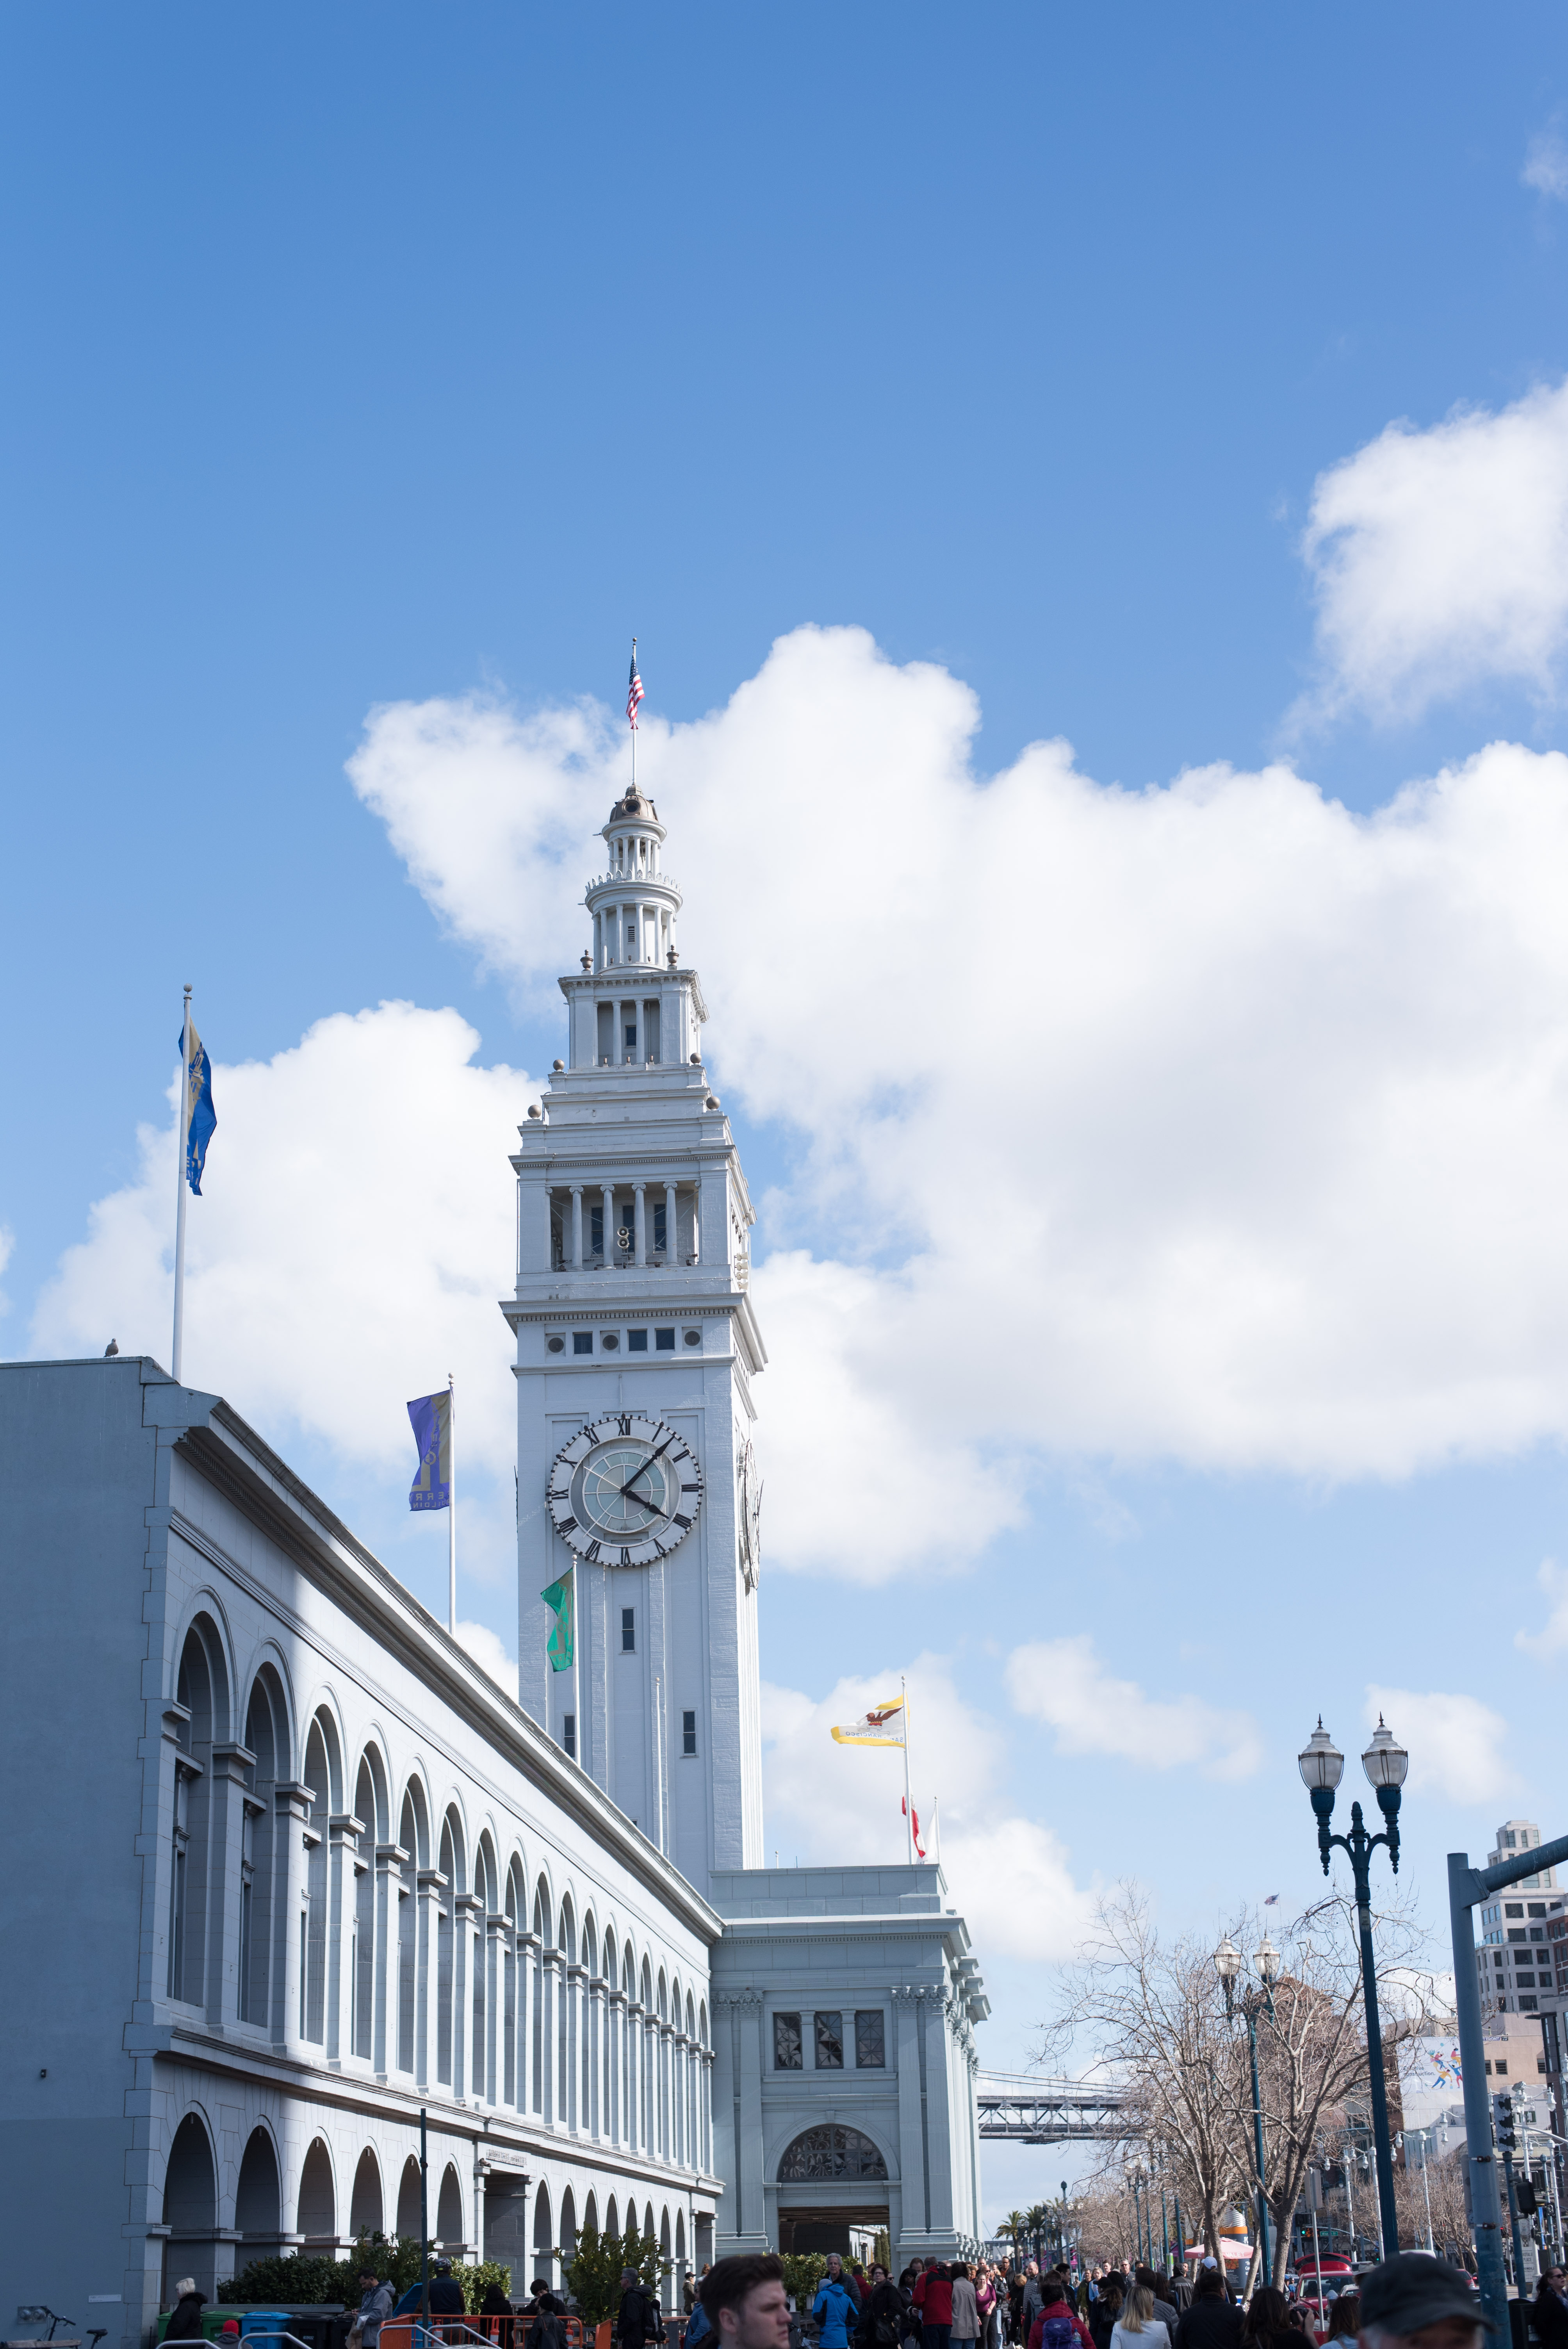 San Francisco Travel Guide - Ferry Building Marketplace